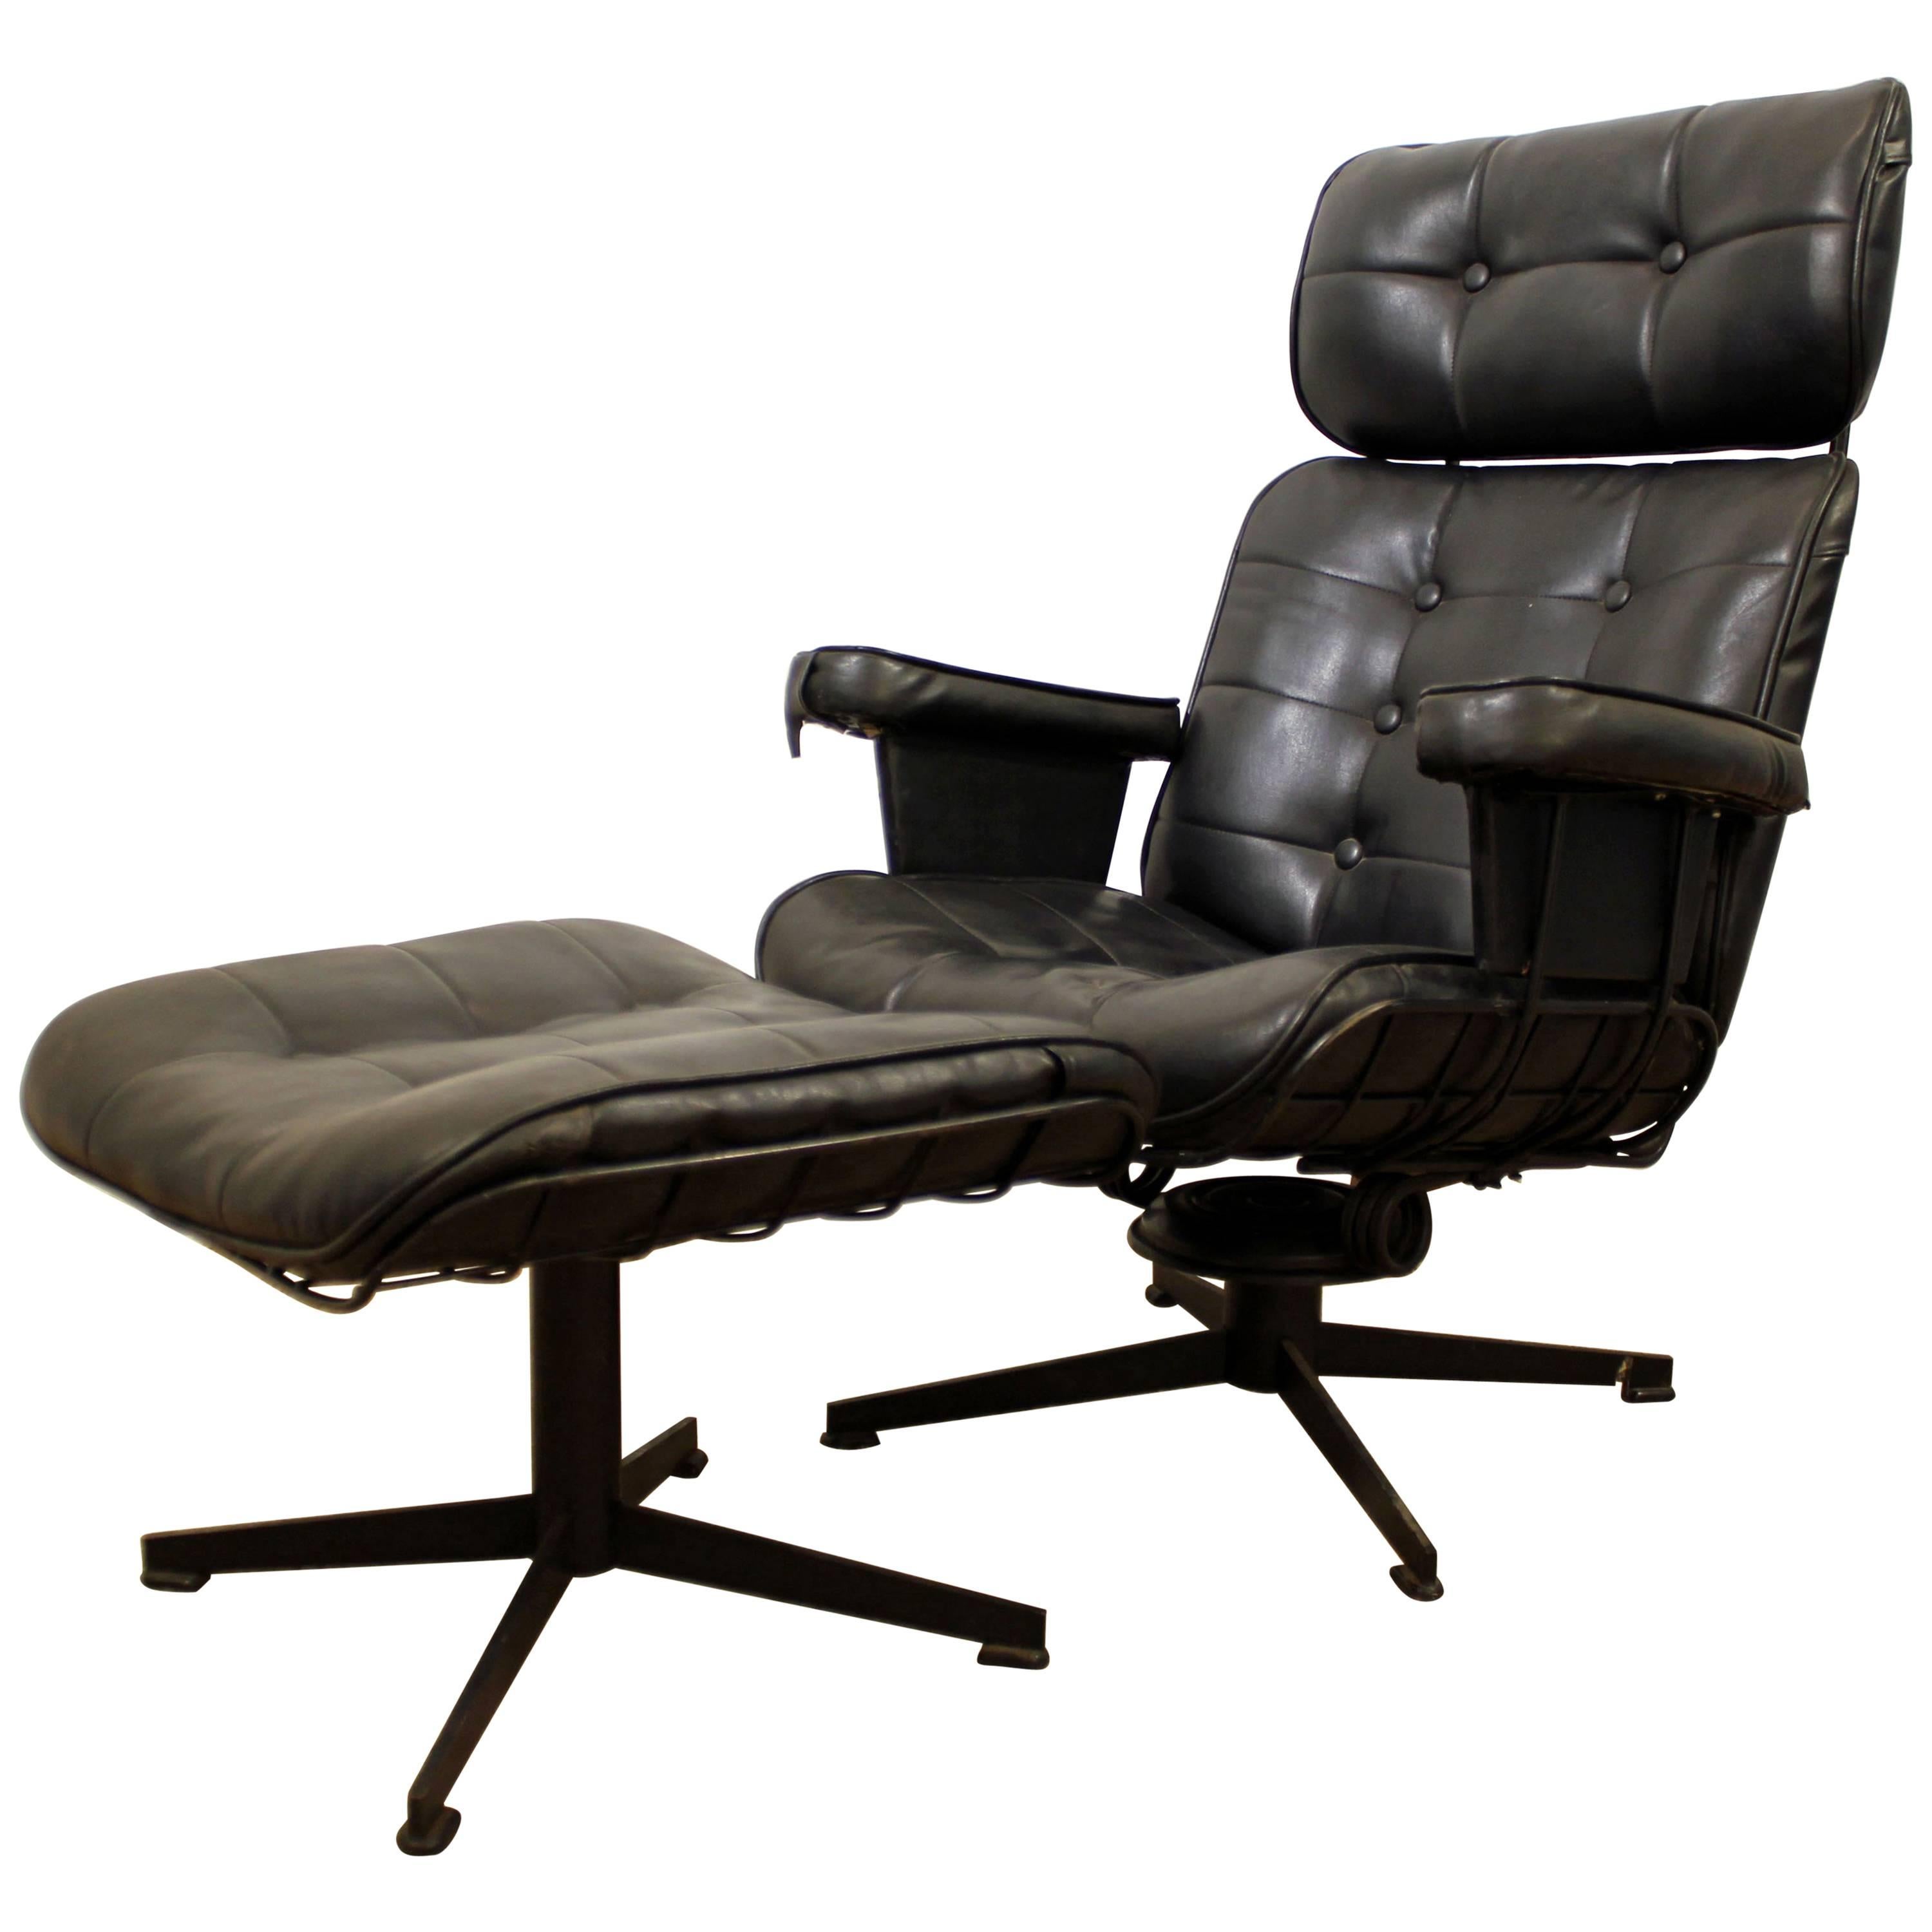 Homecrest Bottemiller Lounge Chair B99T and Ottoman B610